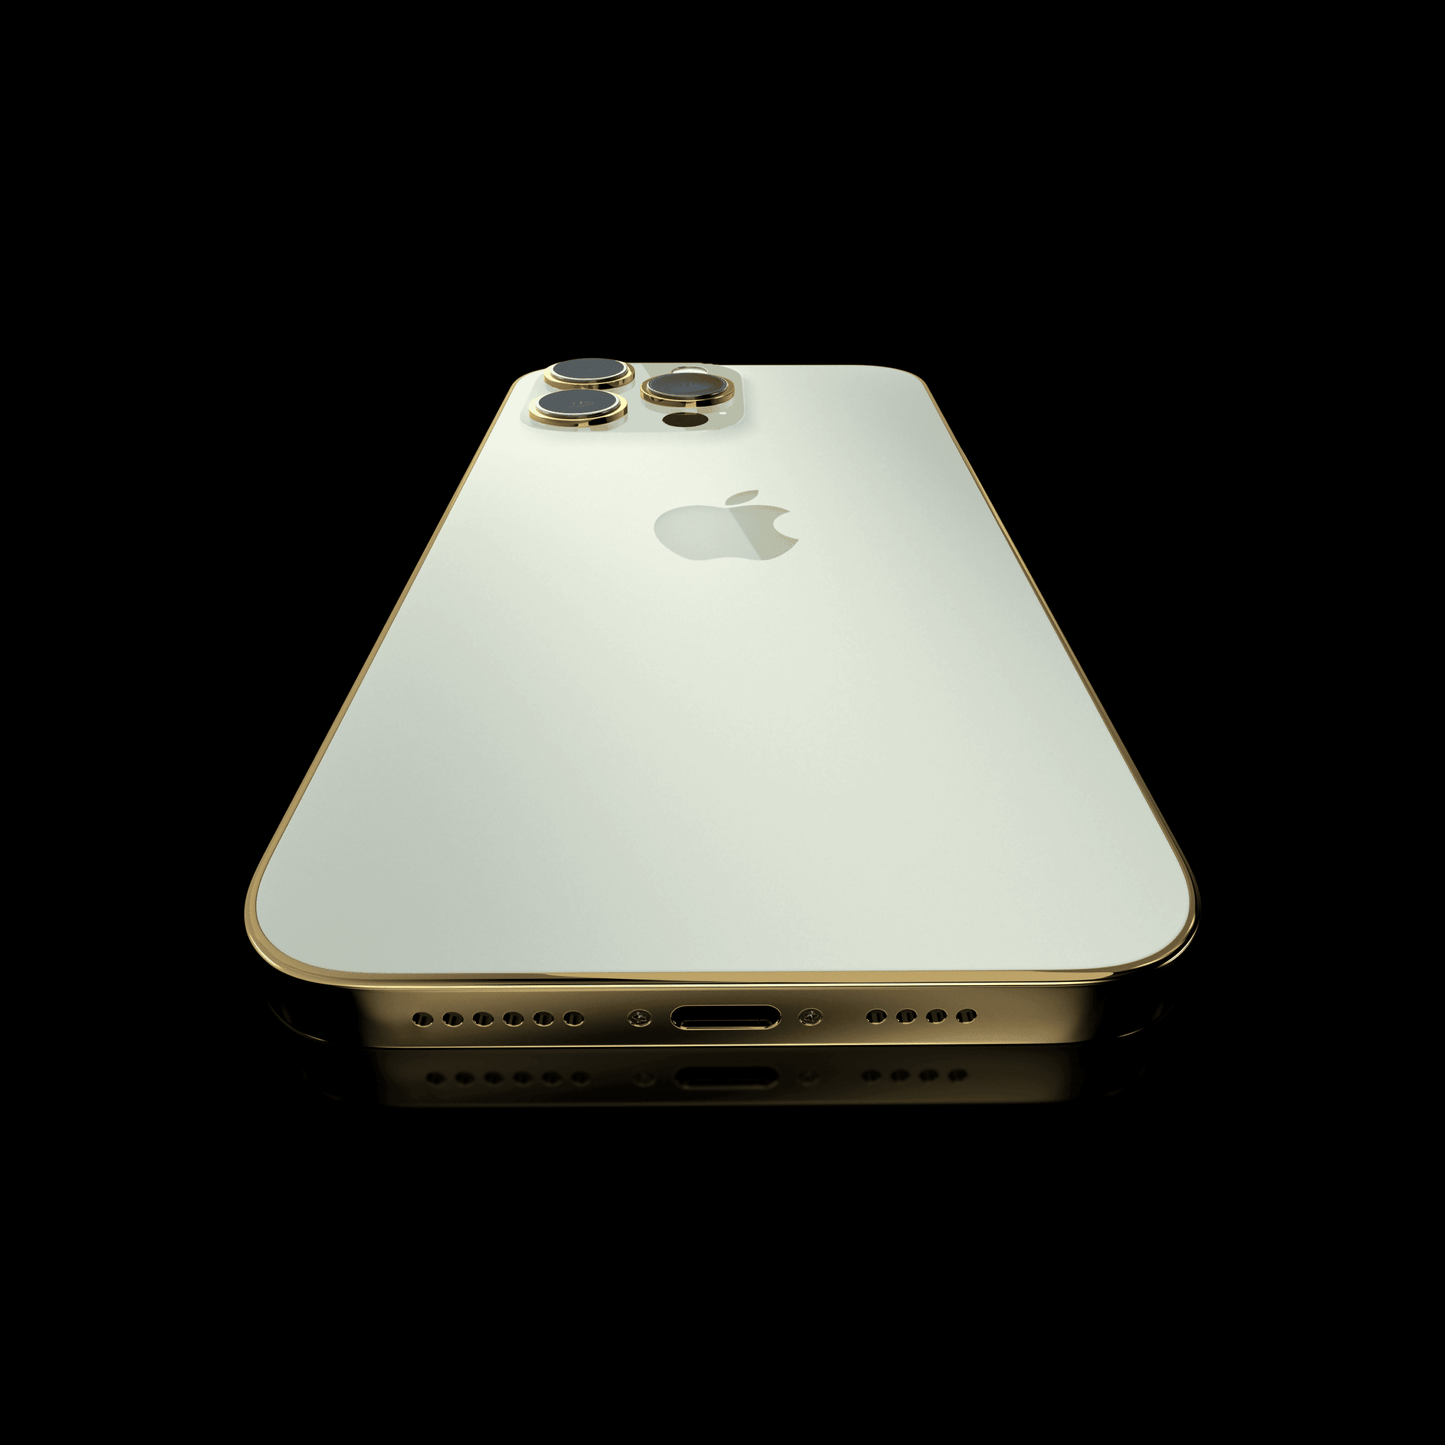 24K Gold Plated Frame Apple iPhone 13 Pro Max - White - 128 GB